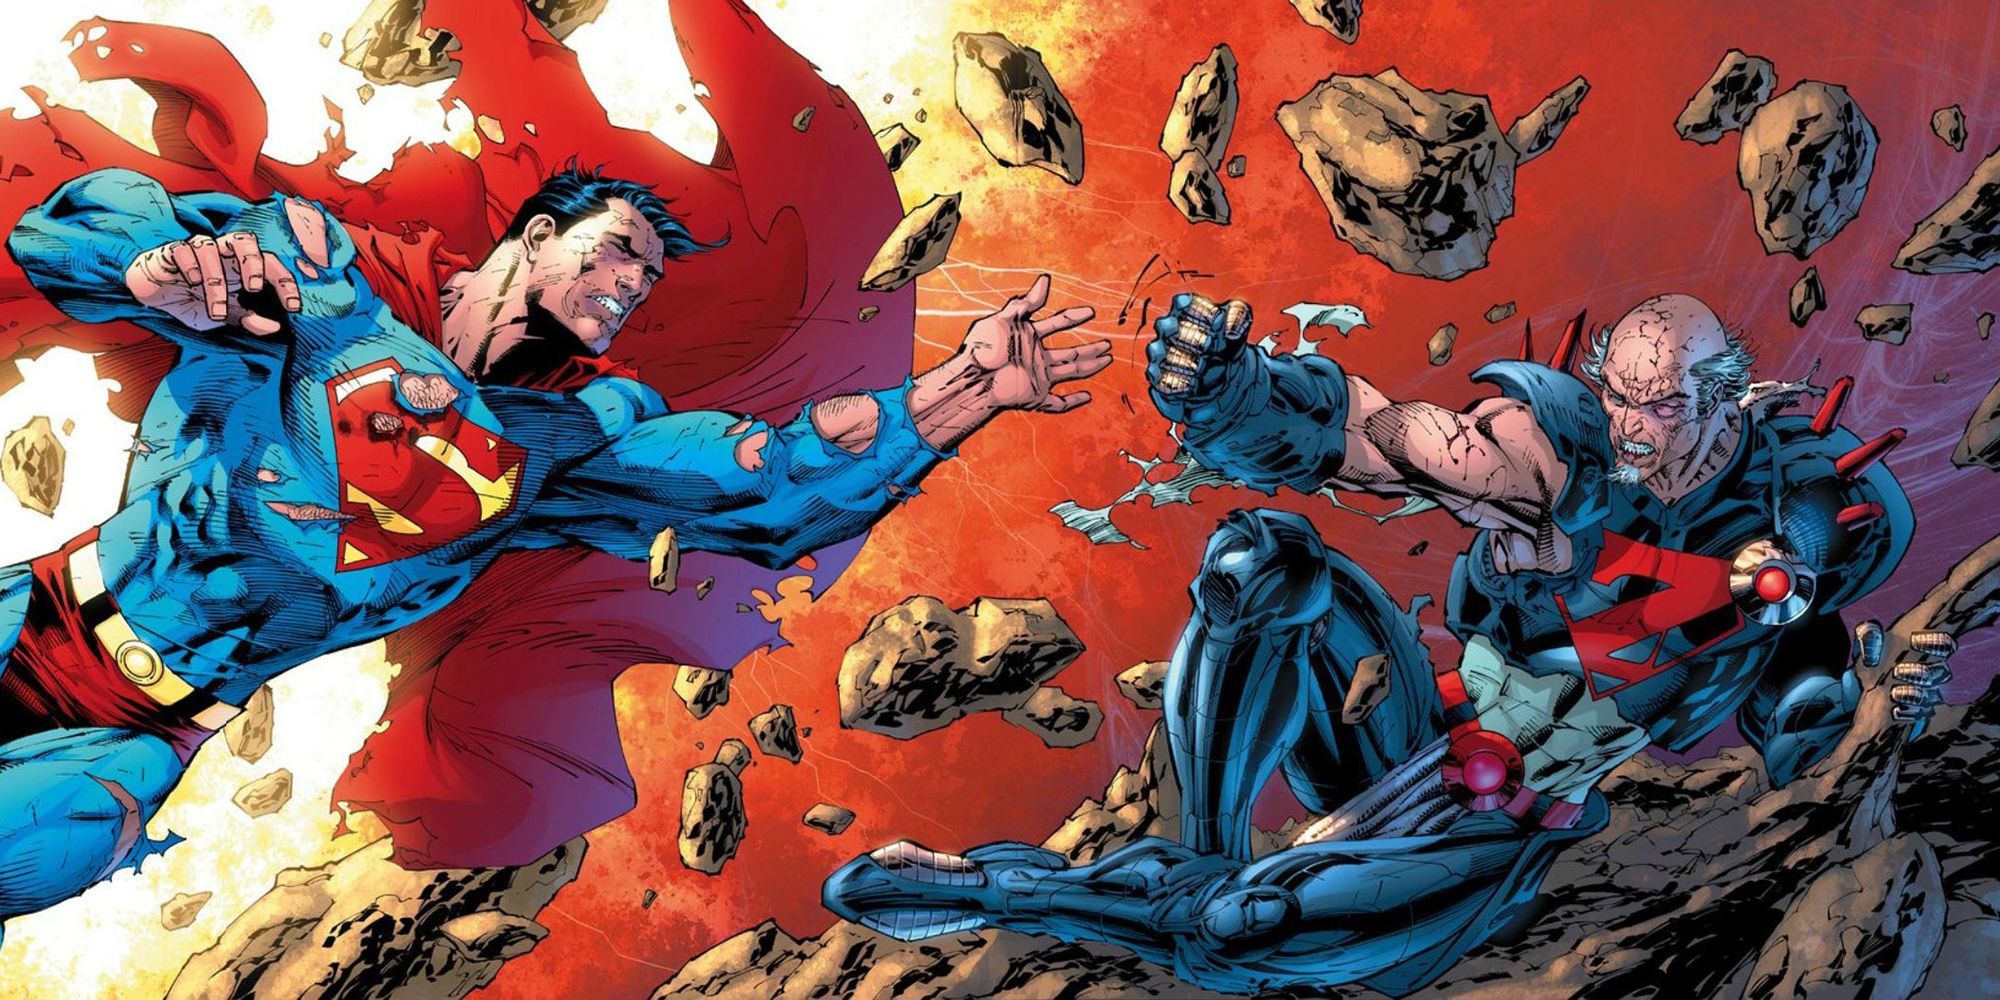 Superman For Tomorrow battles General Zod in DC's Superman comics